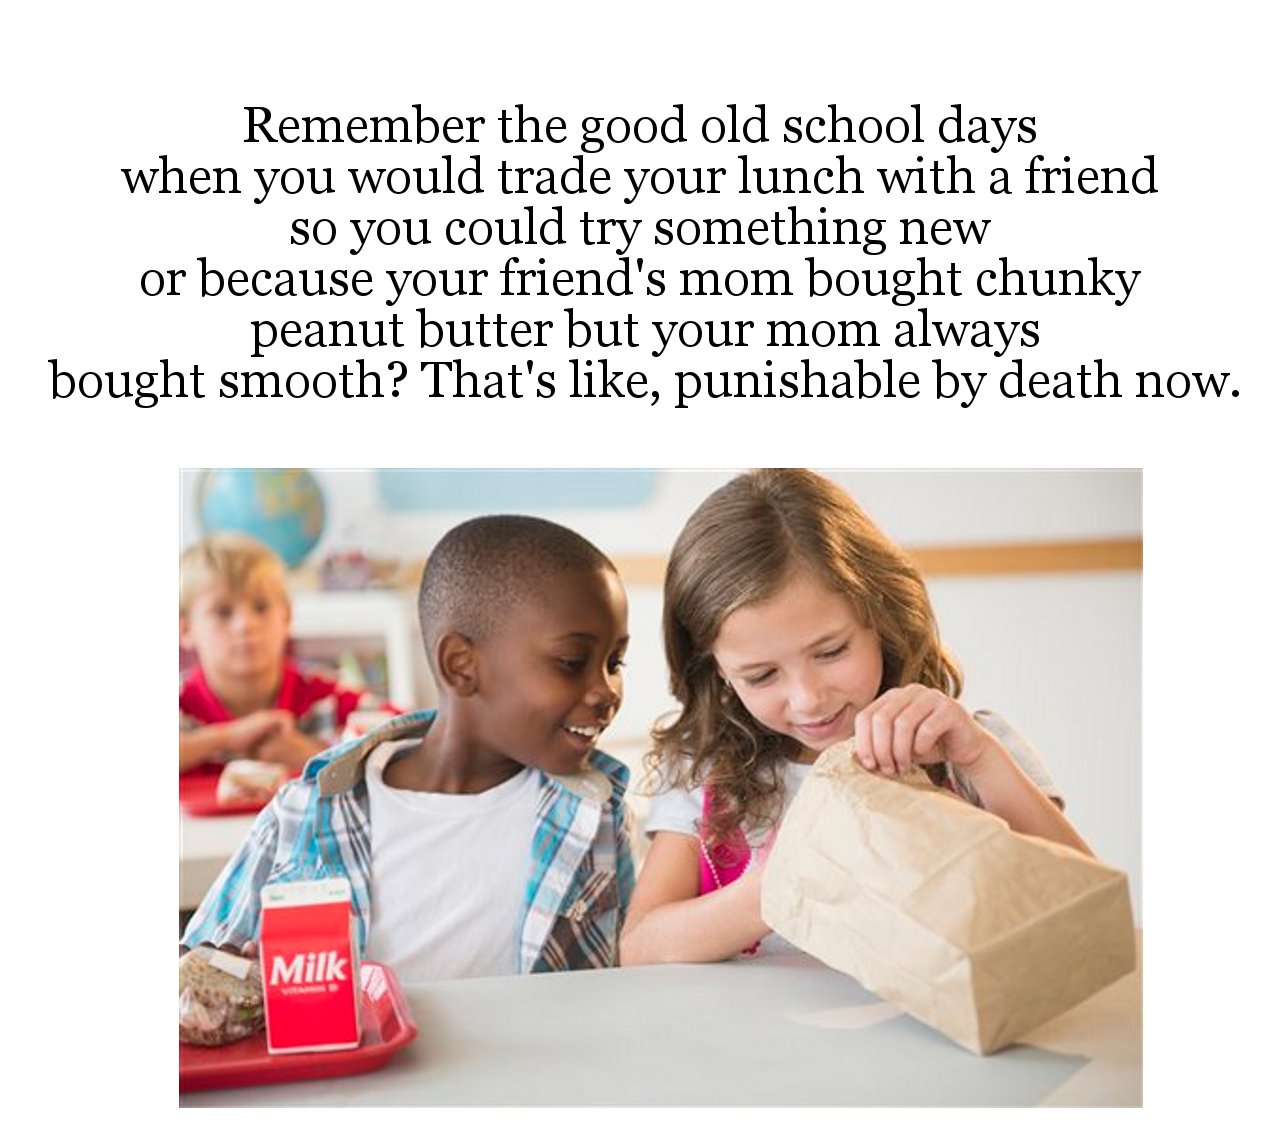 kids with paper bag lunch - Remember the good old school days when you would trade your lunch with a friend so you could try something new or because your friend's mom bought chunky peanut butter but your mom always bought smooth? That's , punishable by d